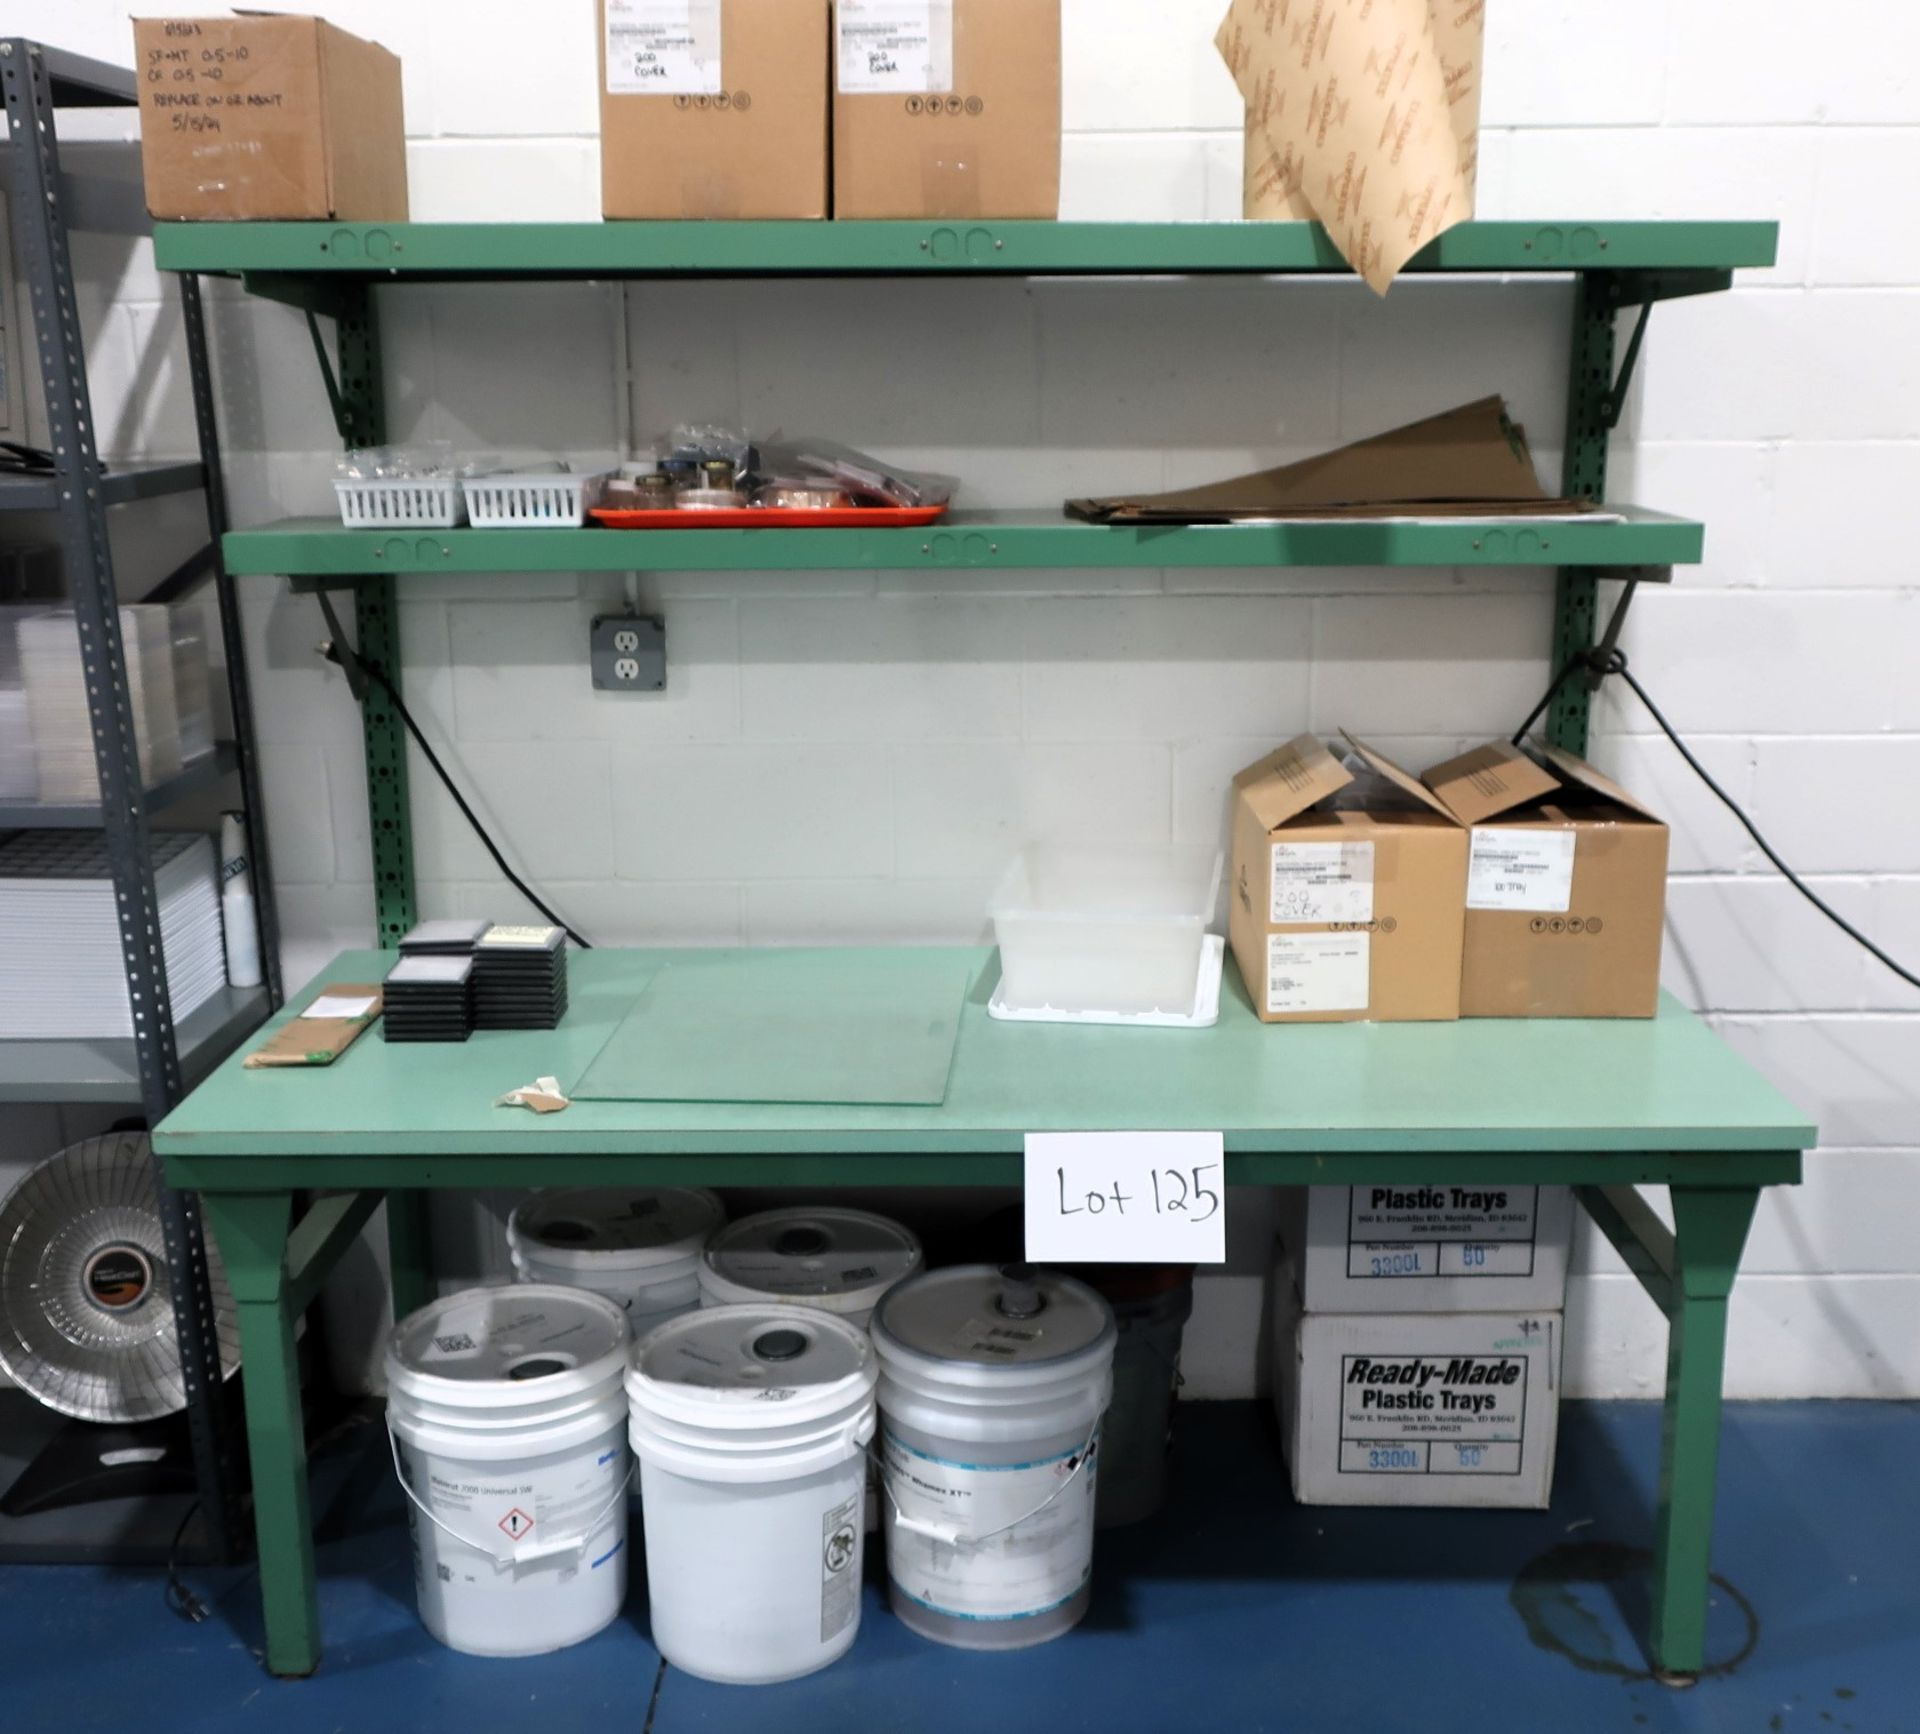 (5) Green work Benches